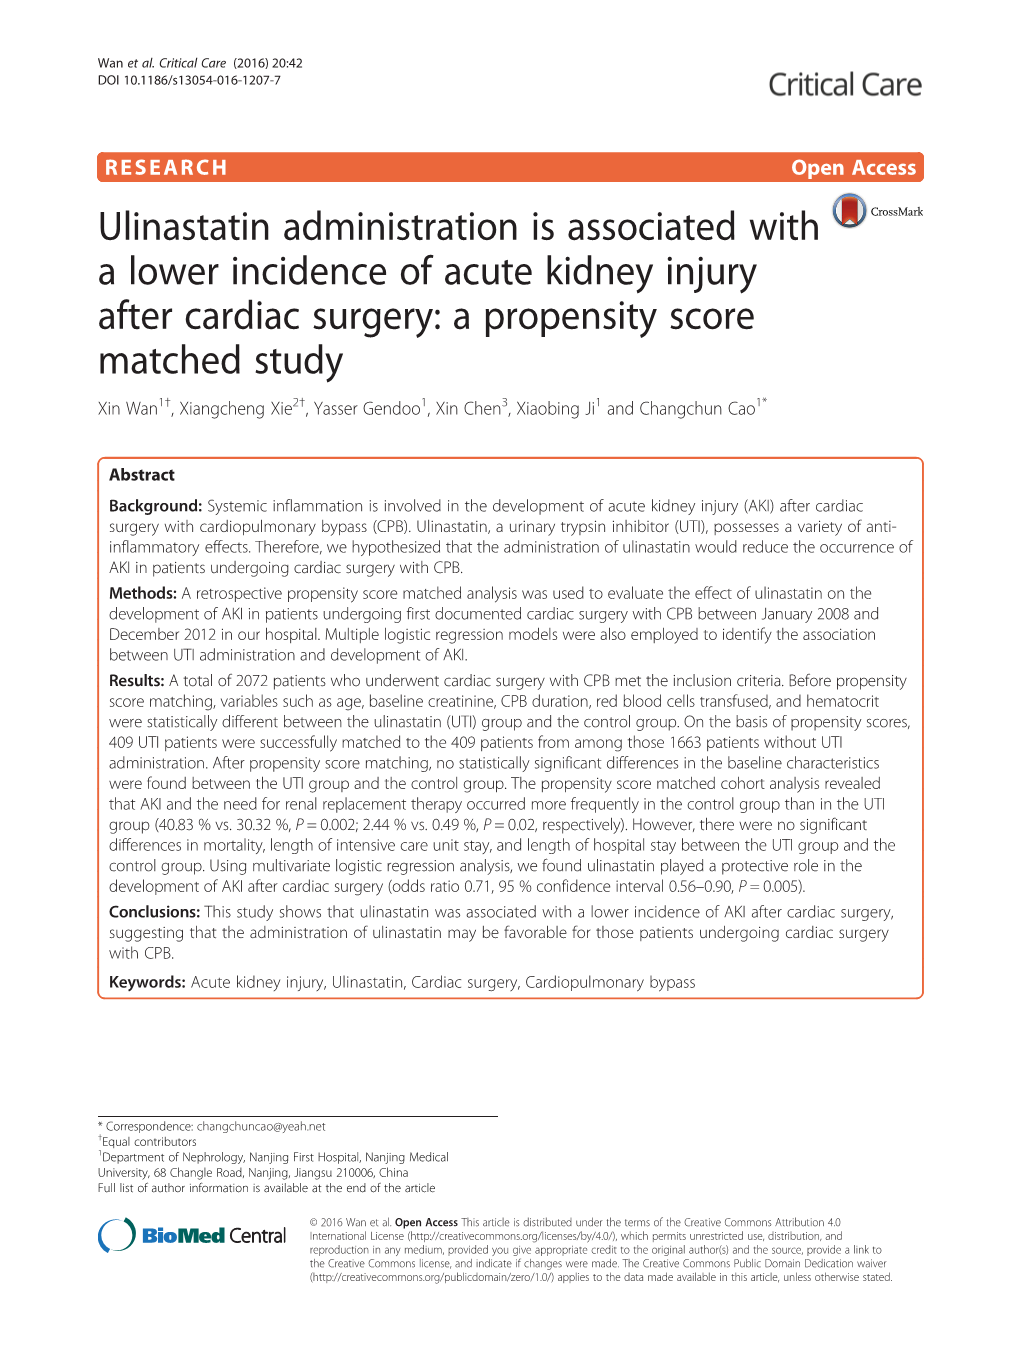 Ulinastatin Administration Is Associated with a Lower Incidence of Acute Kidney Injury After Cardiac Surgery: a Propensity Score